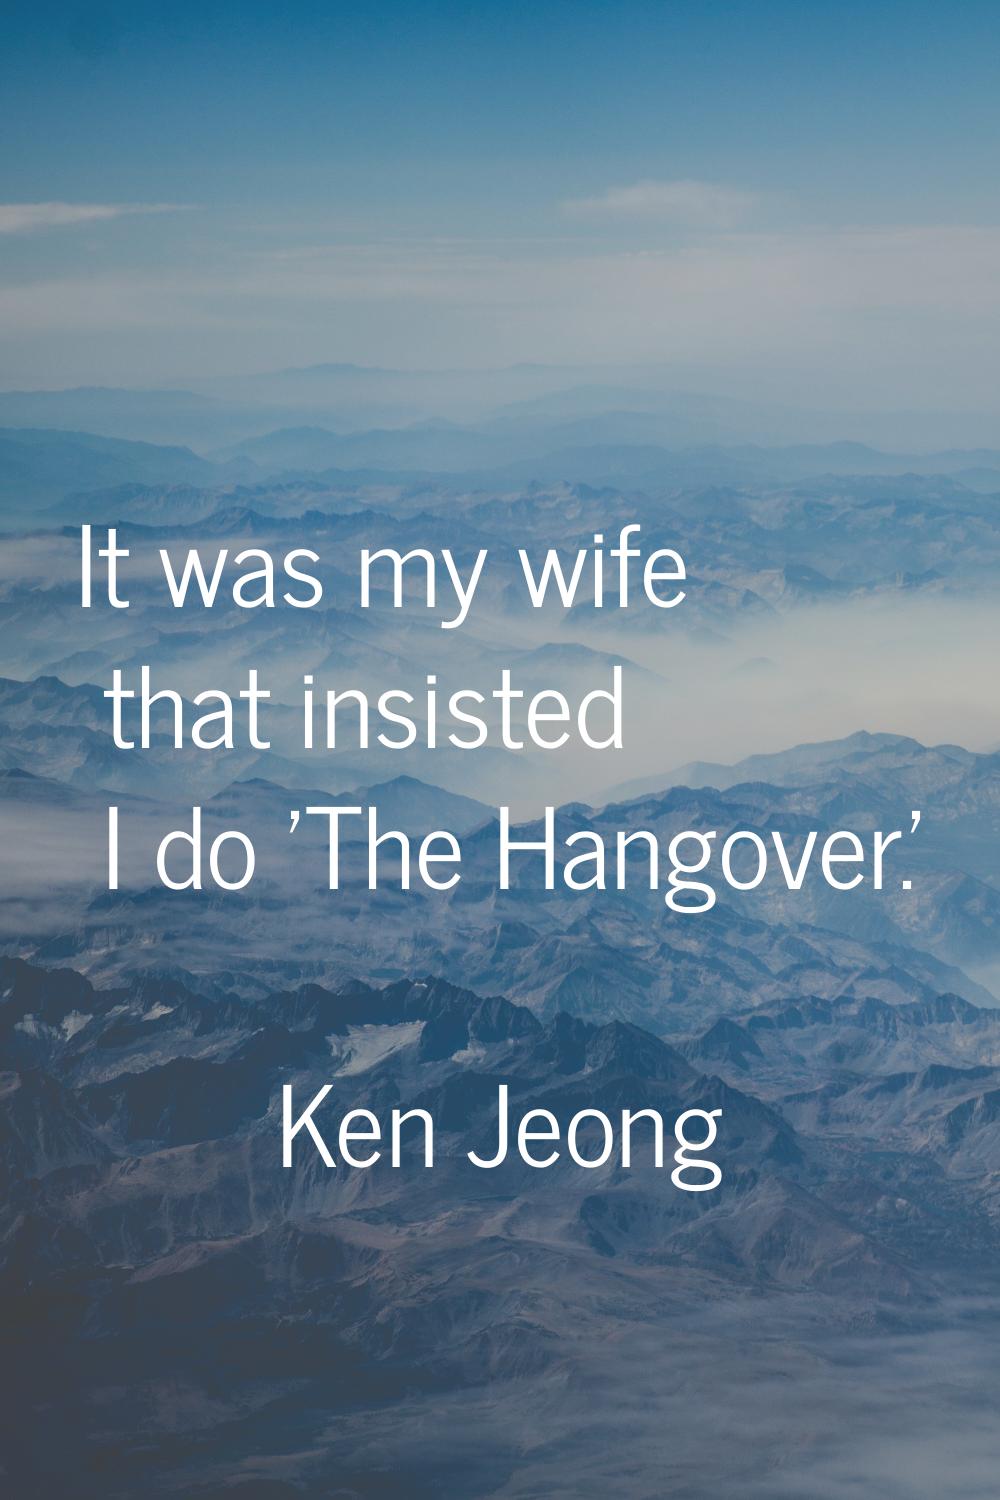 It was my wife that insisted I do 'The Hangover.'